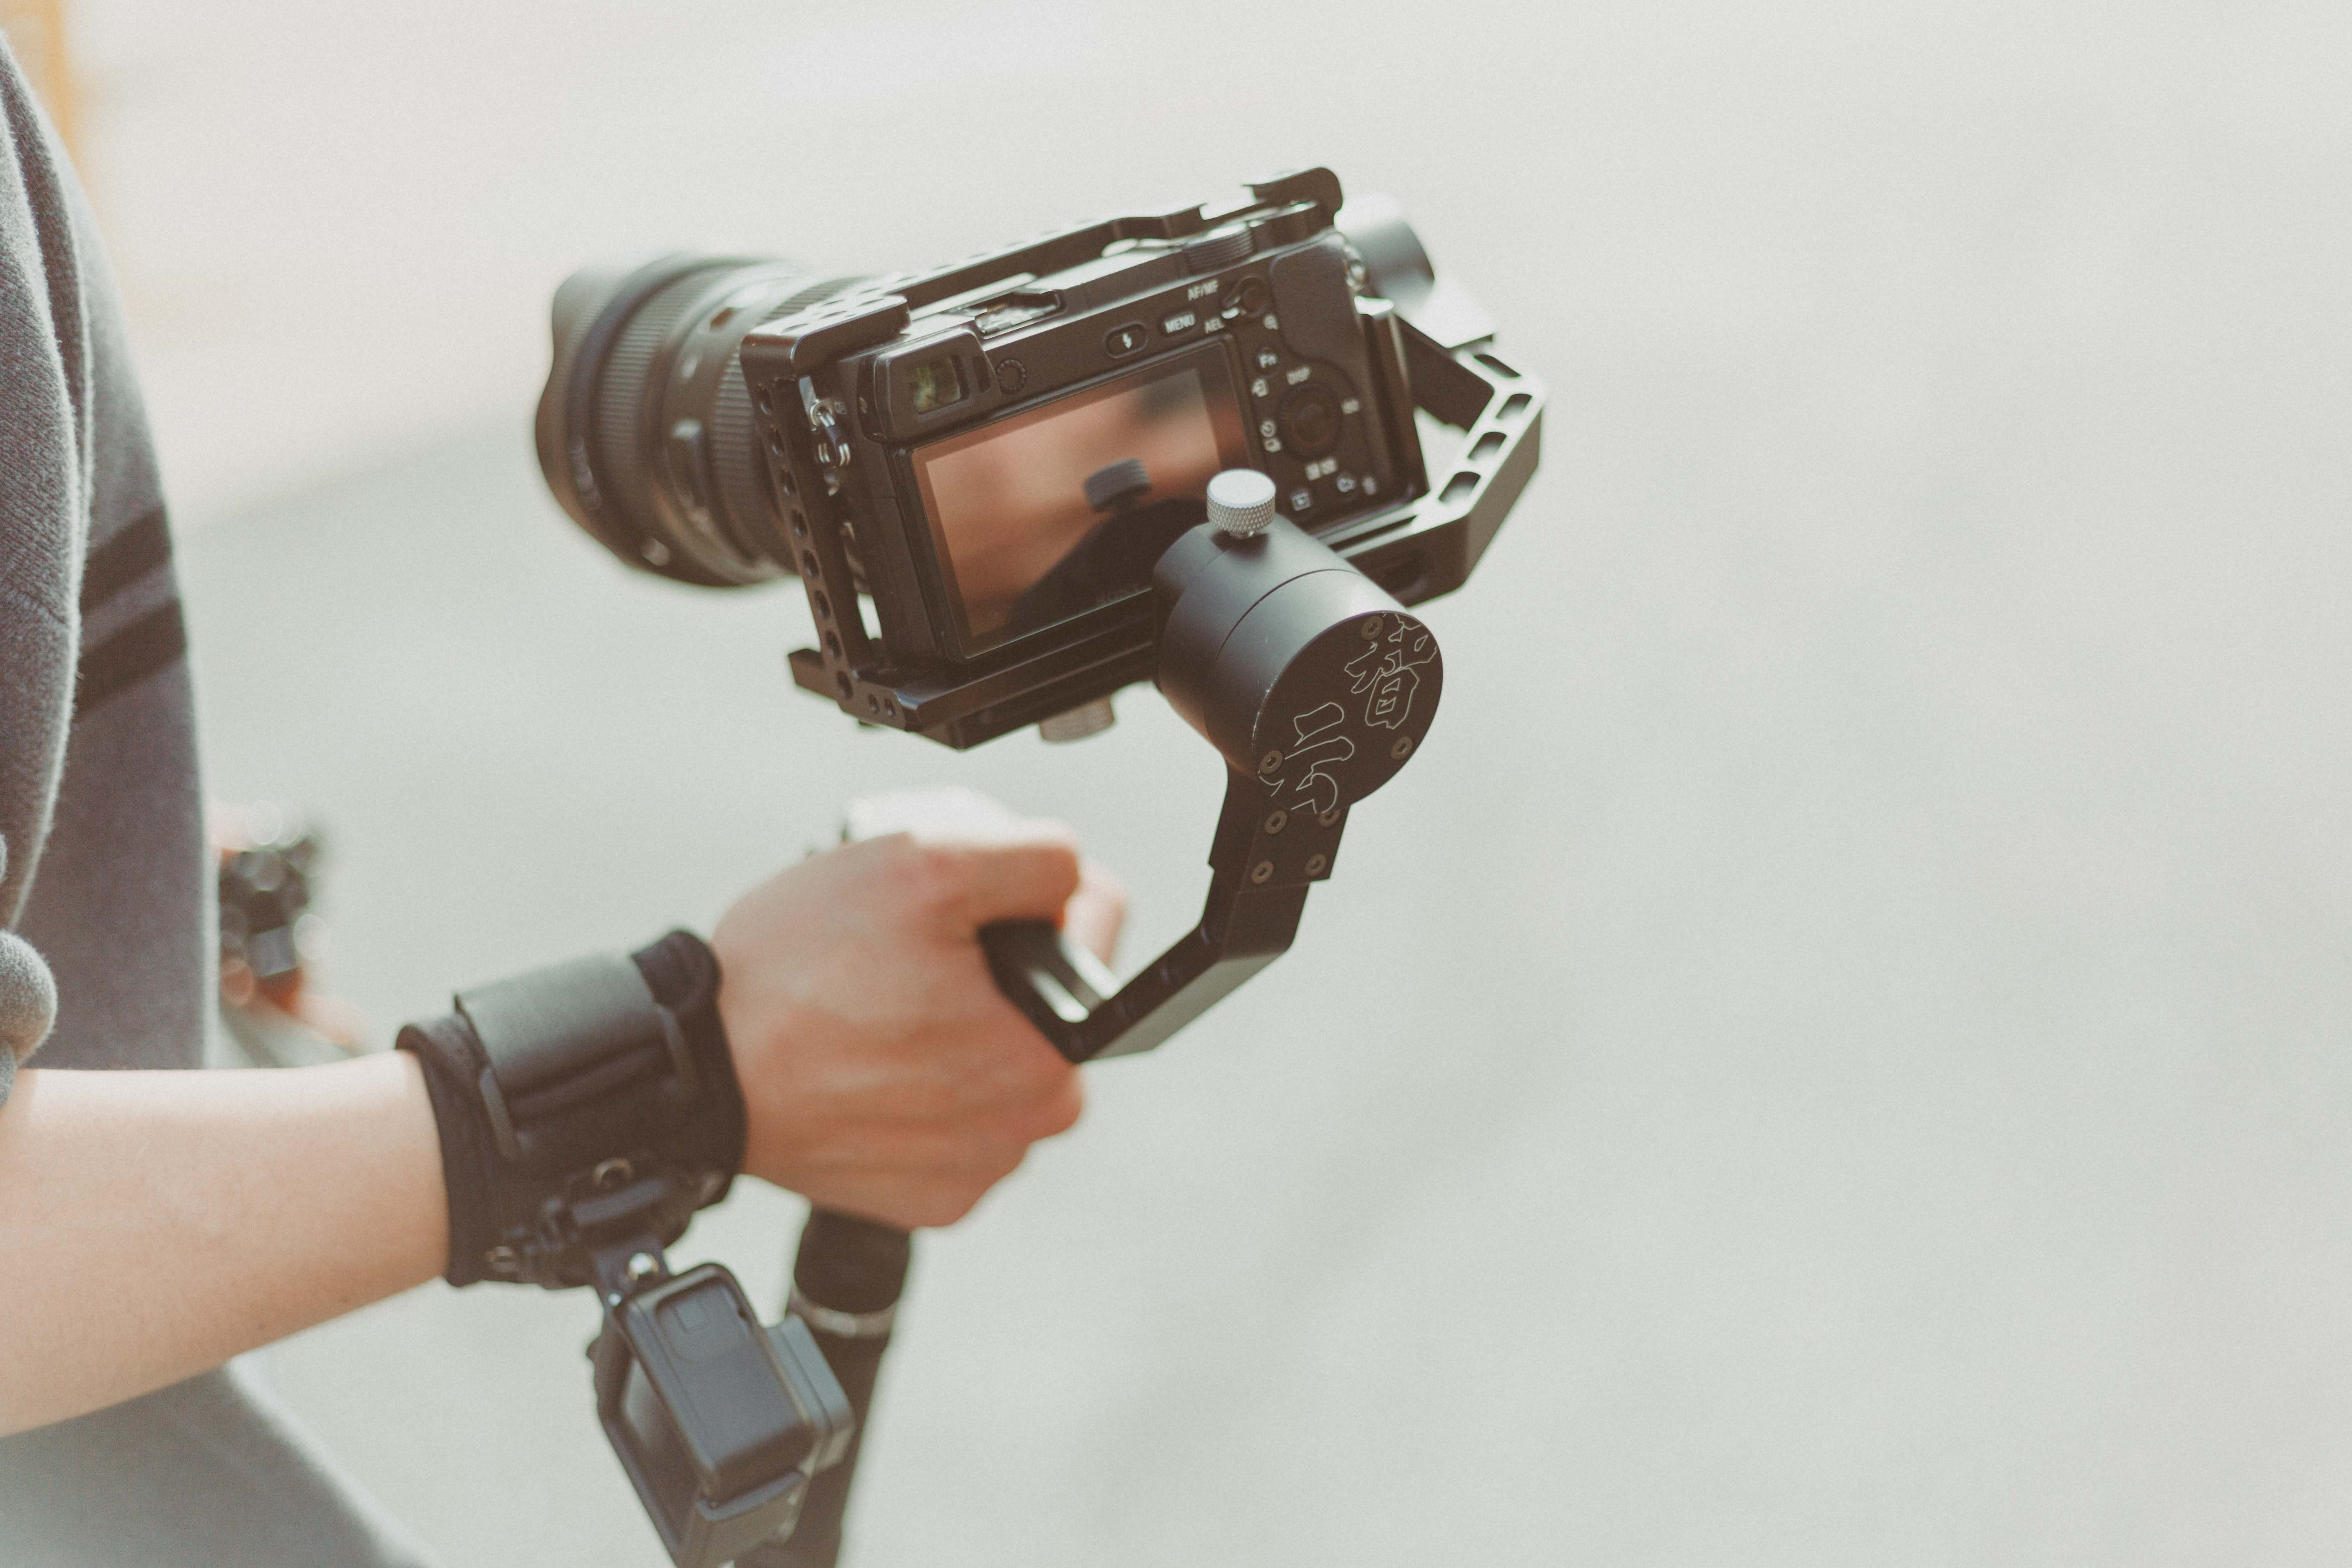 How to record videos with DSLR cameras